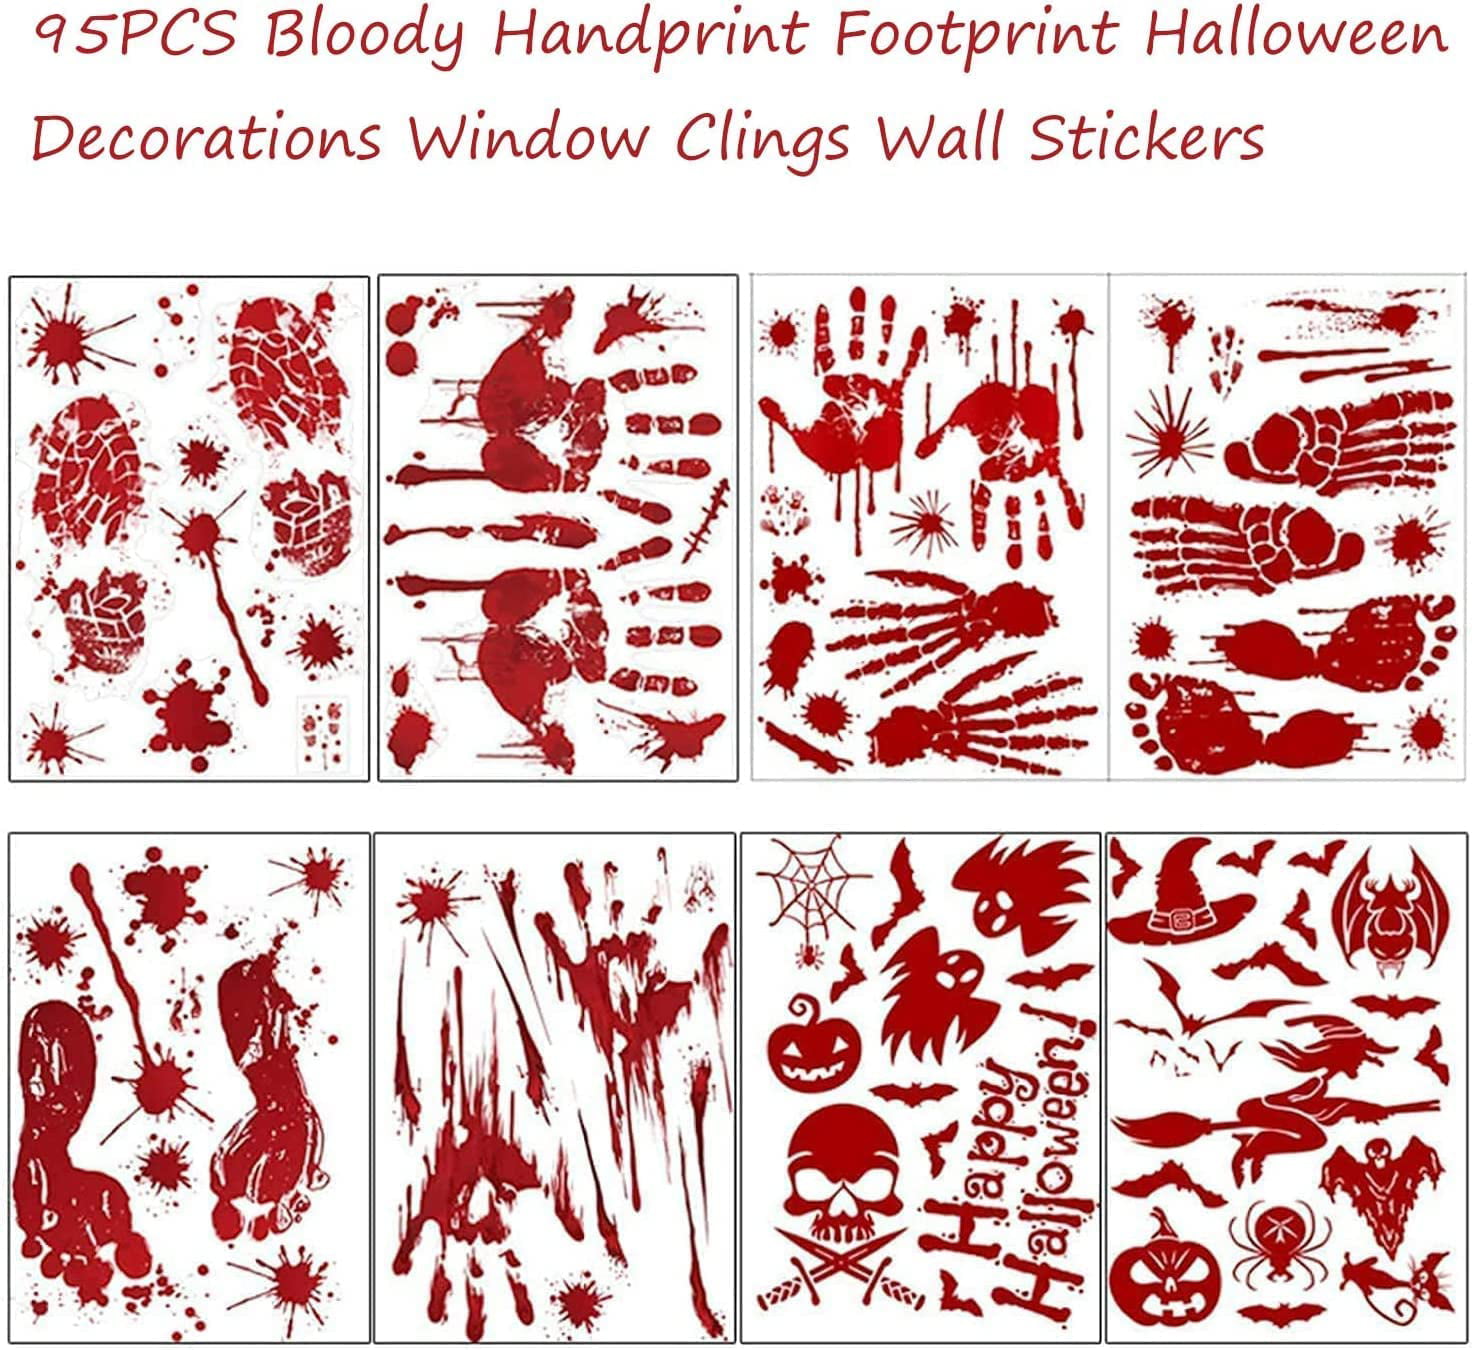 LAWOHO Halloween Party Stickers Window Clings Wall Decals Vampire Zombie Party Decorations Supplies Bloody Handprint Footprints Living Floor Bathroom Decor 